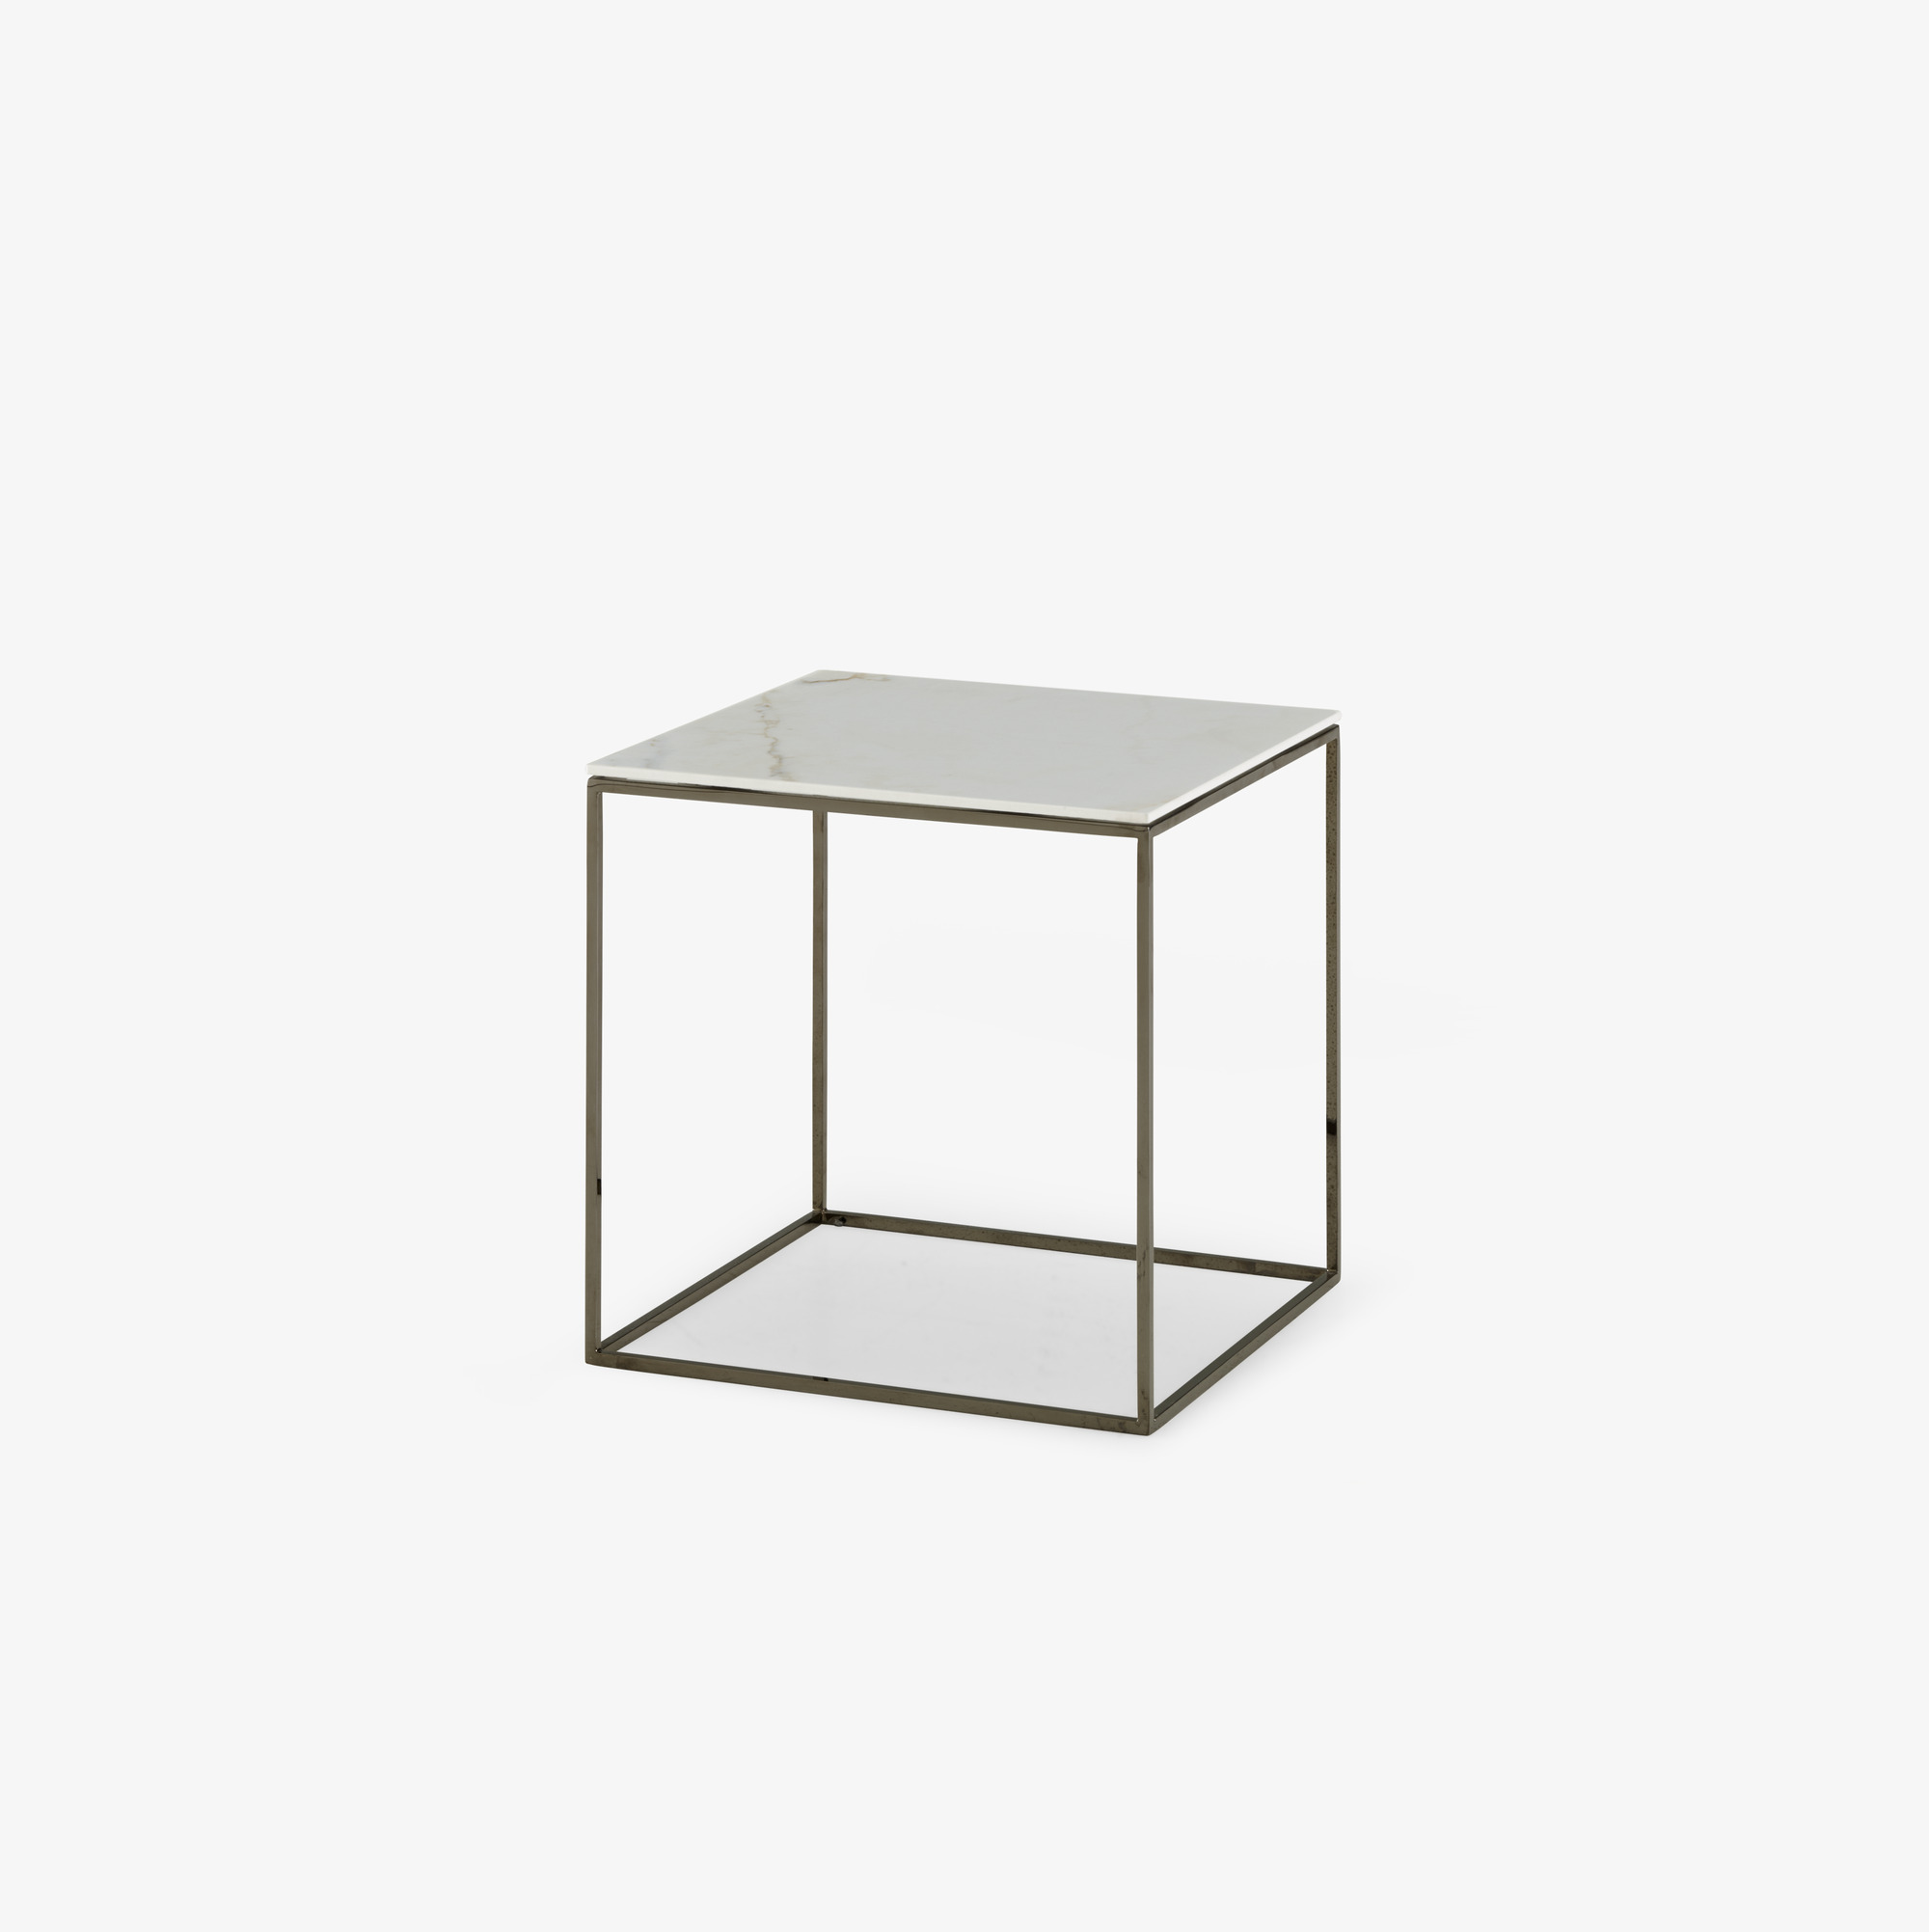 Image Low table - small - 2